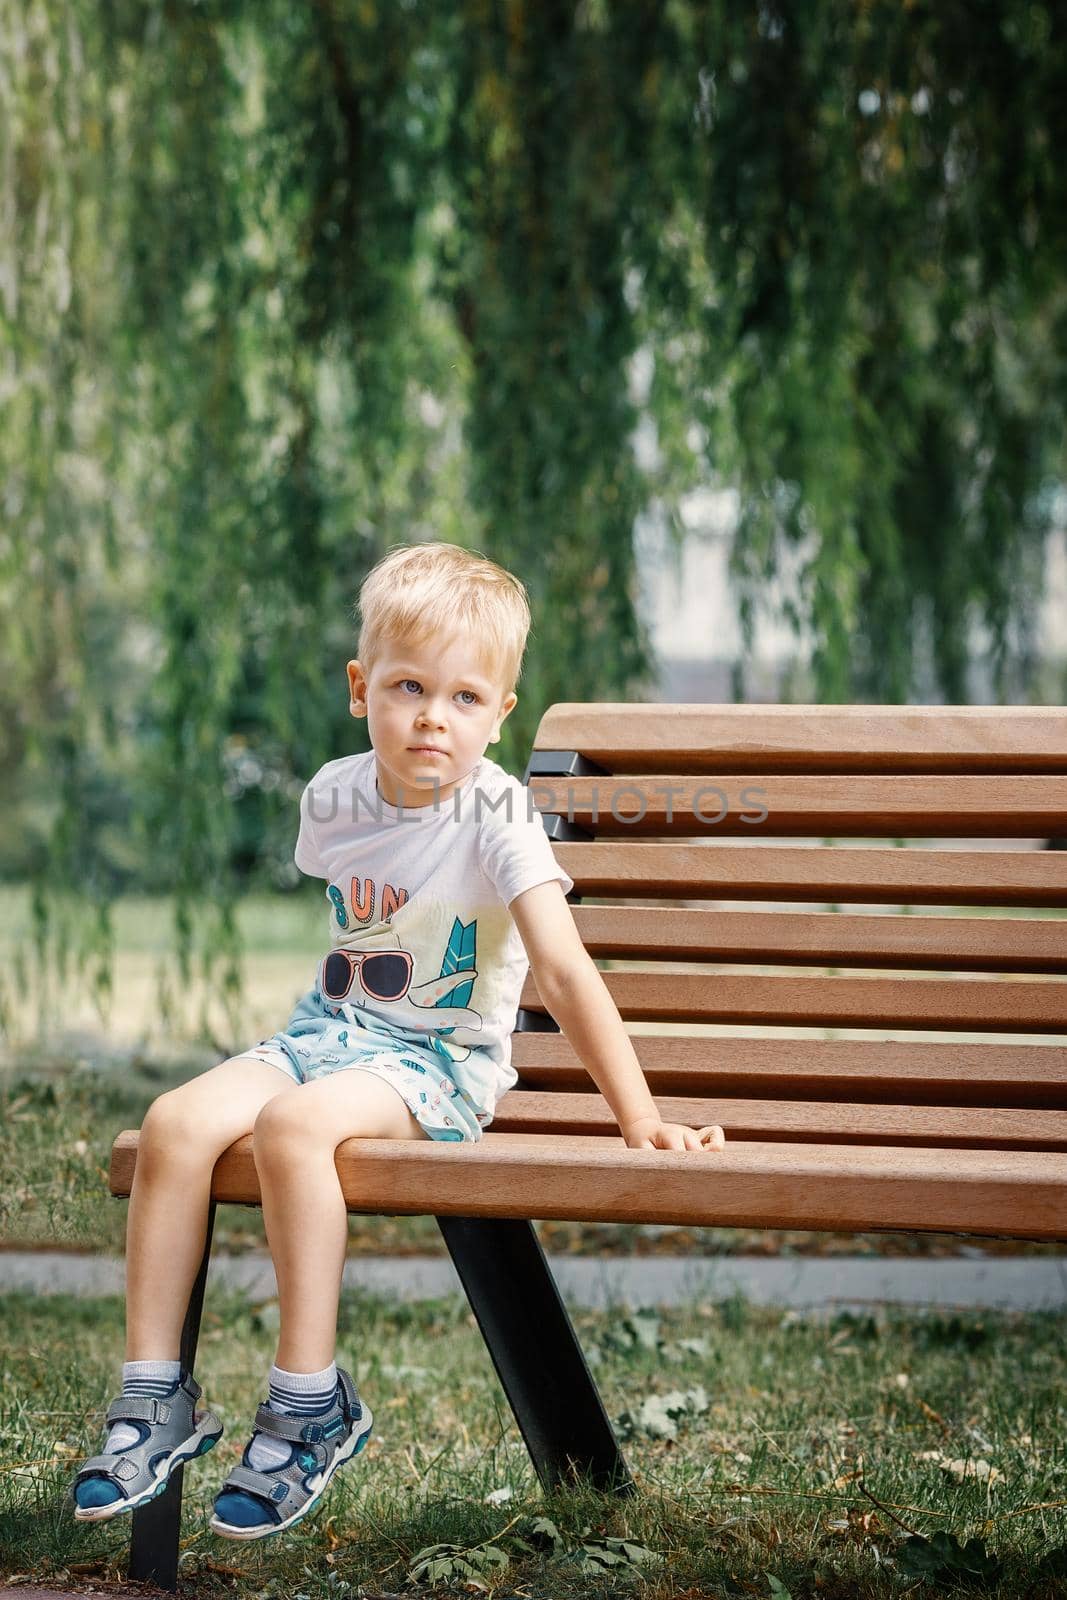 Child portrait sitting on a bench in park, white haired boy 3 years old. Front view, vertical photo.